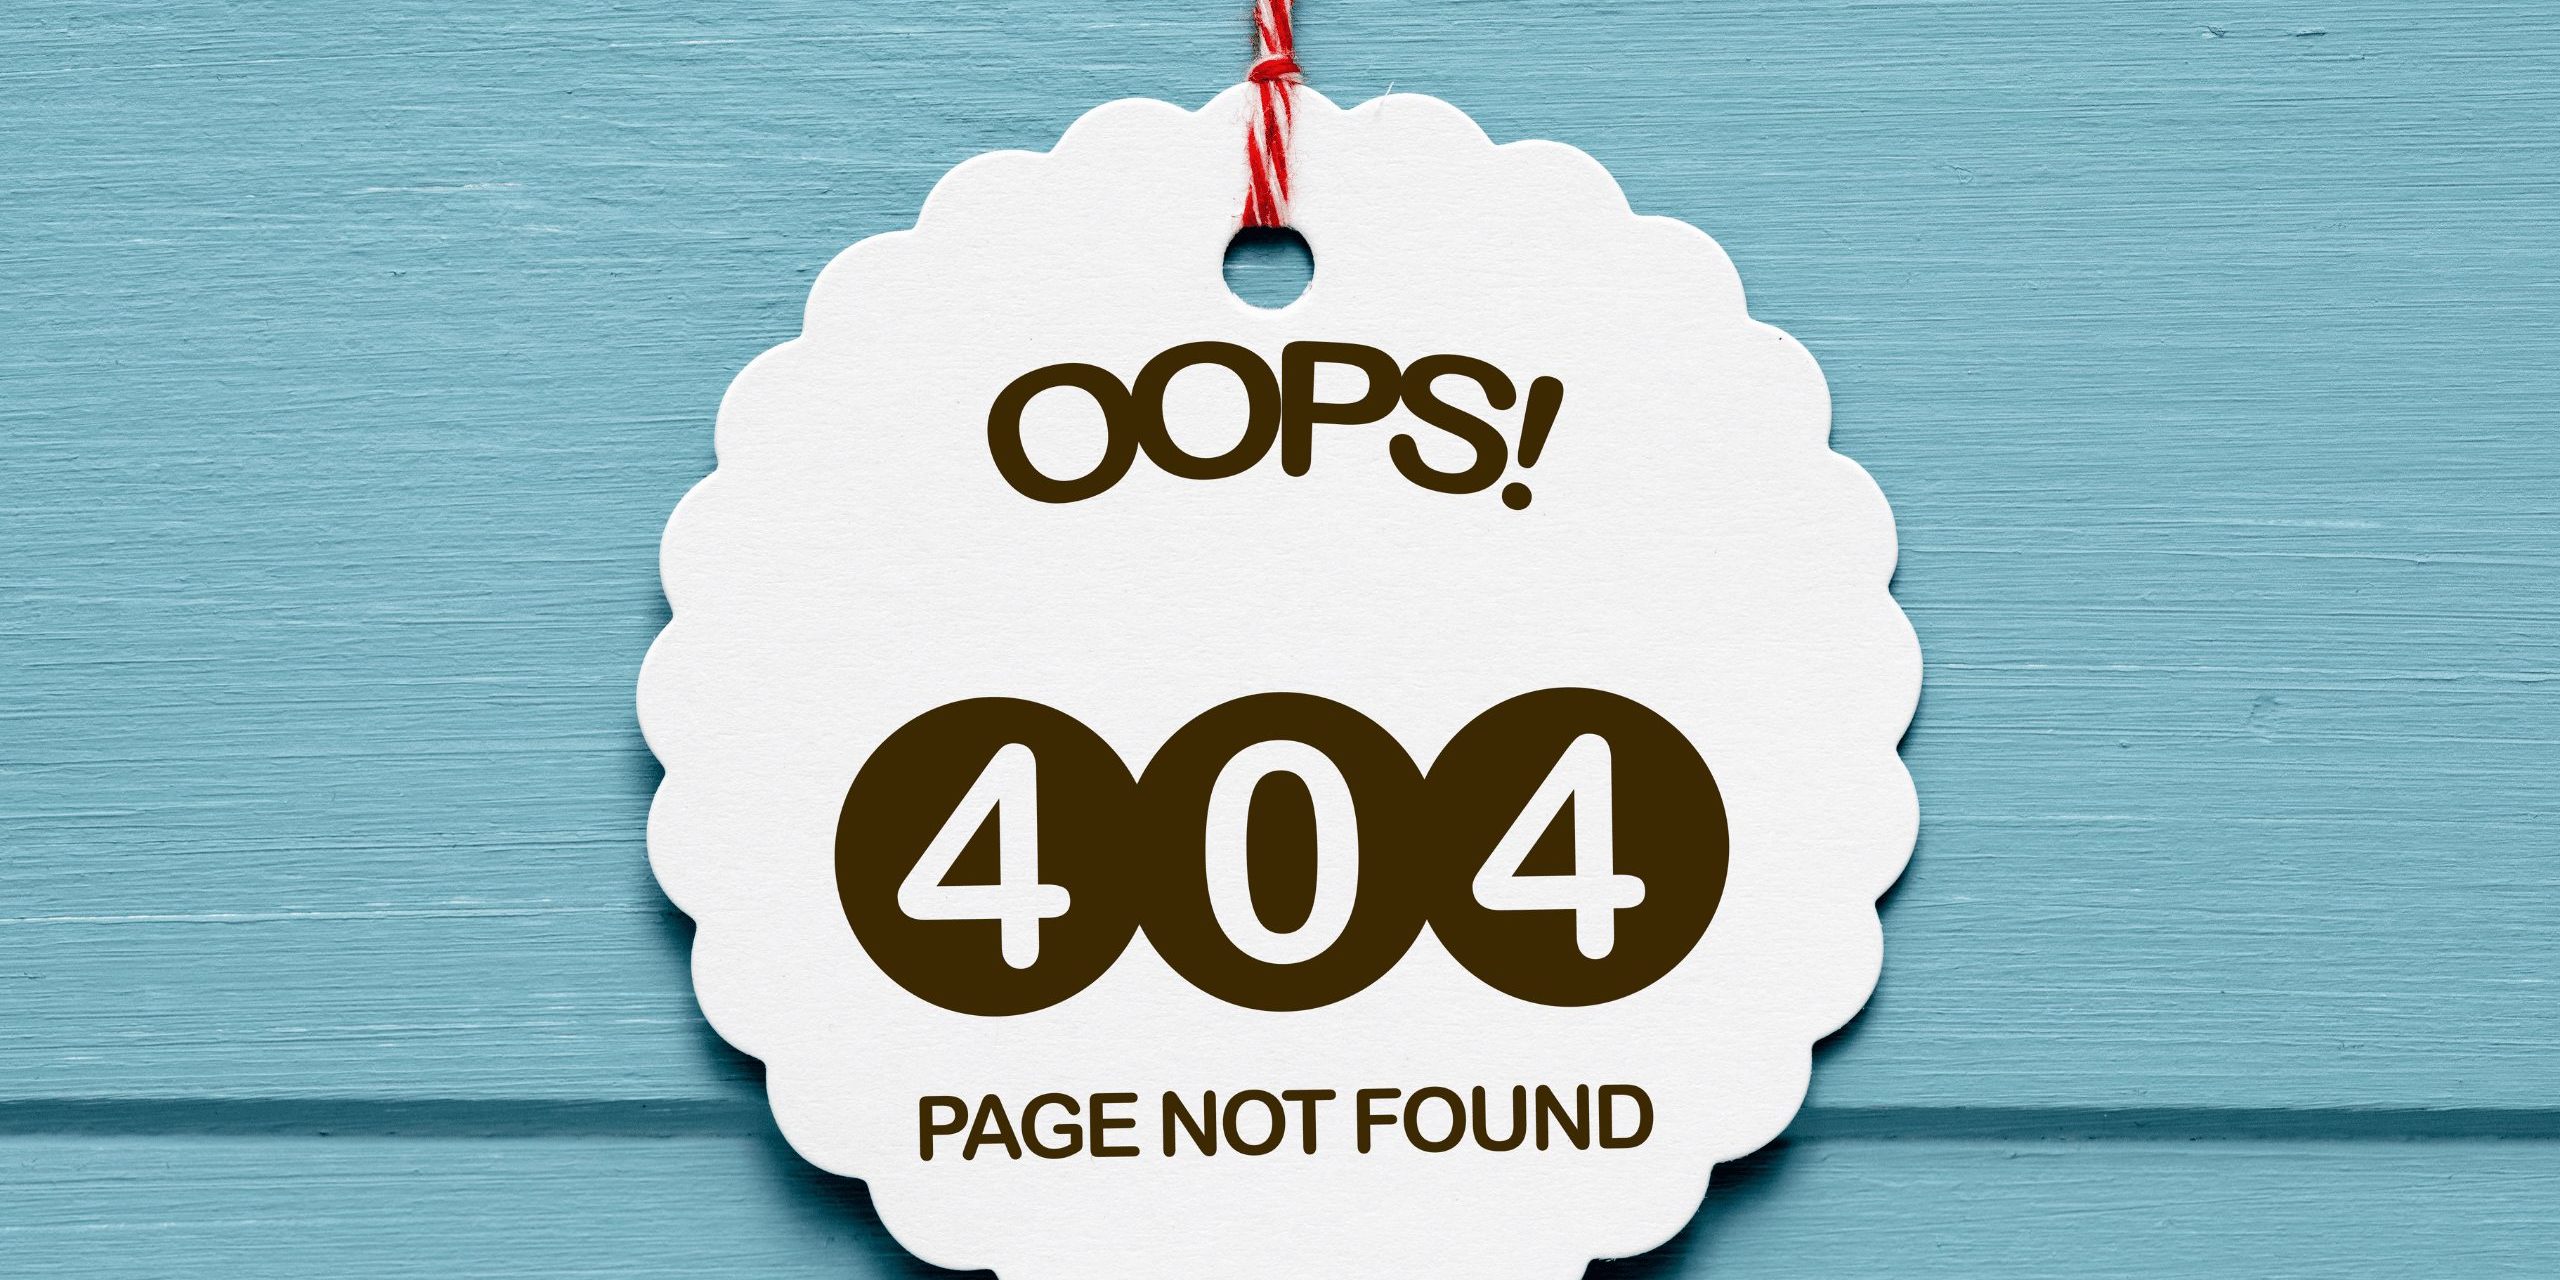 Oops 404 page not found on a tag